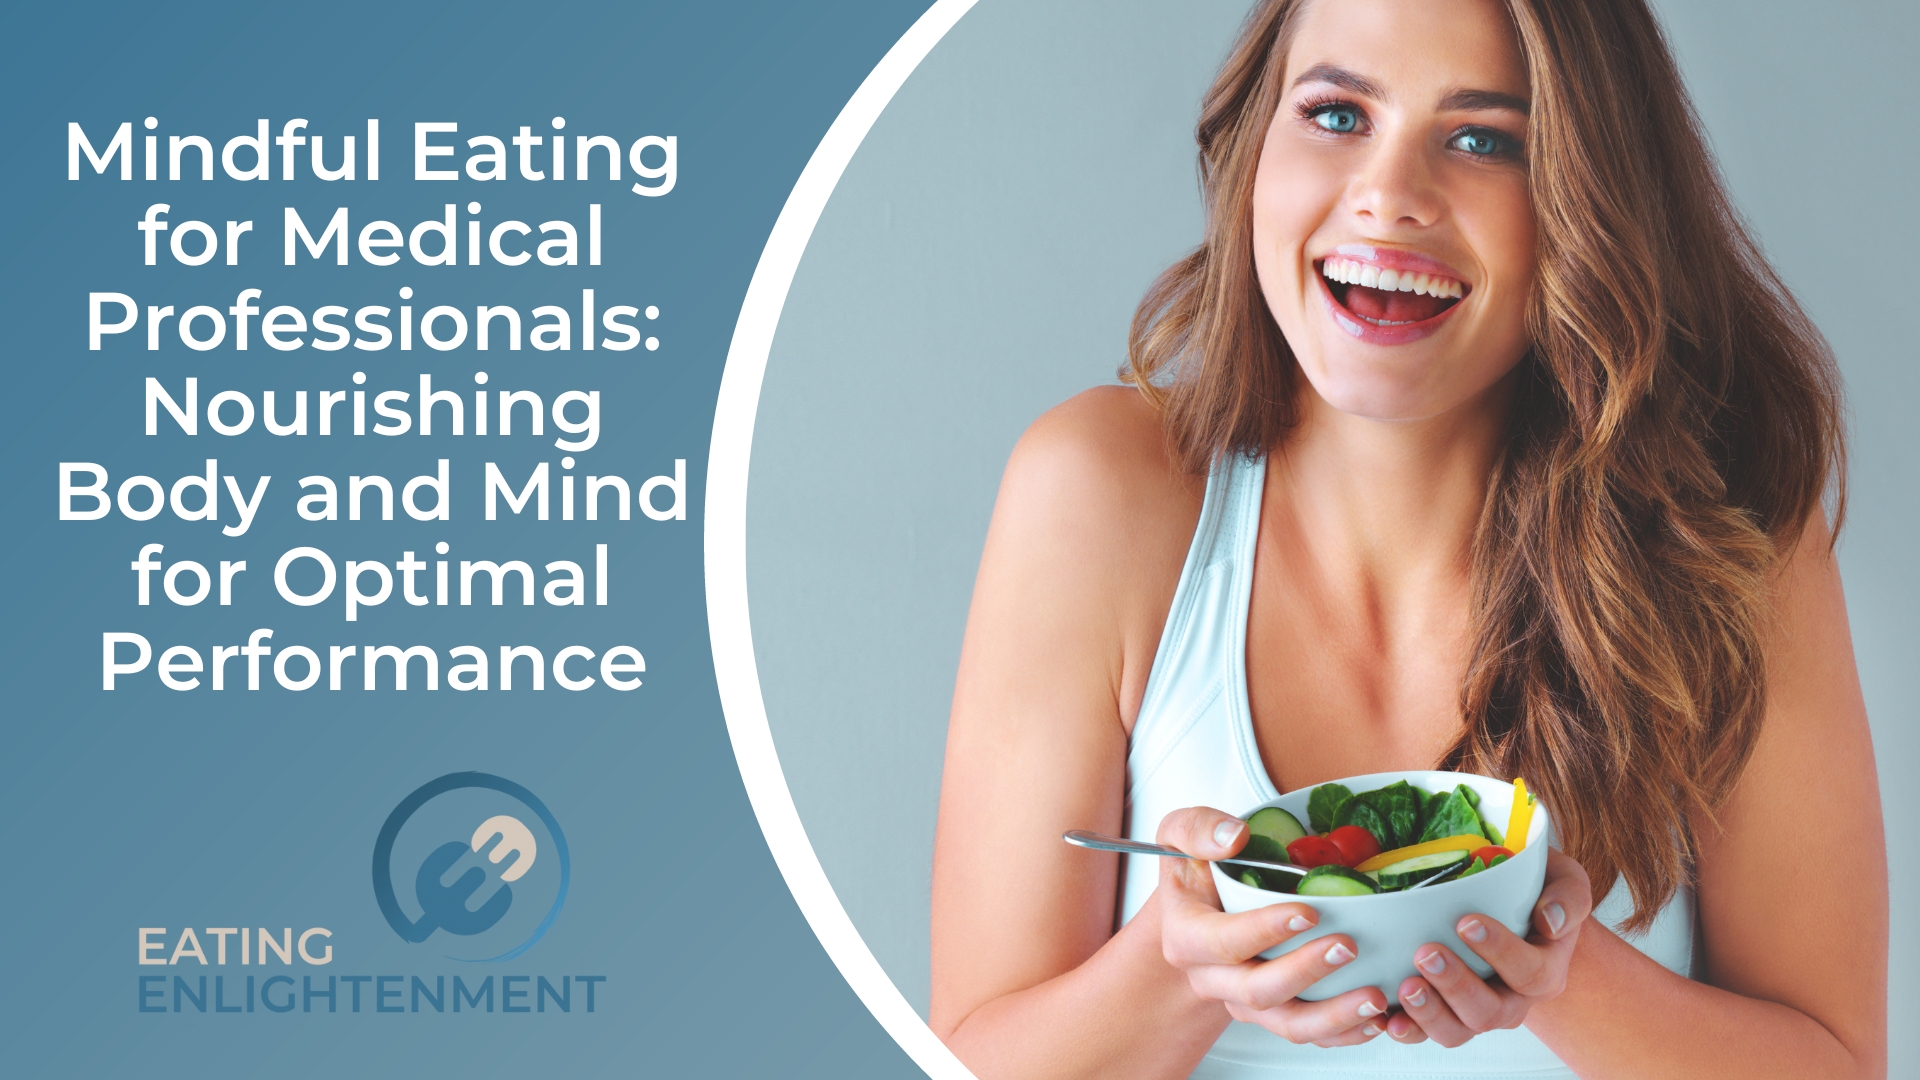 Mindful Eating for Medical Professionals Nourishing Body and Mind for Optimal Performance